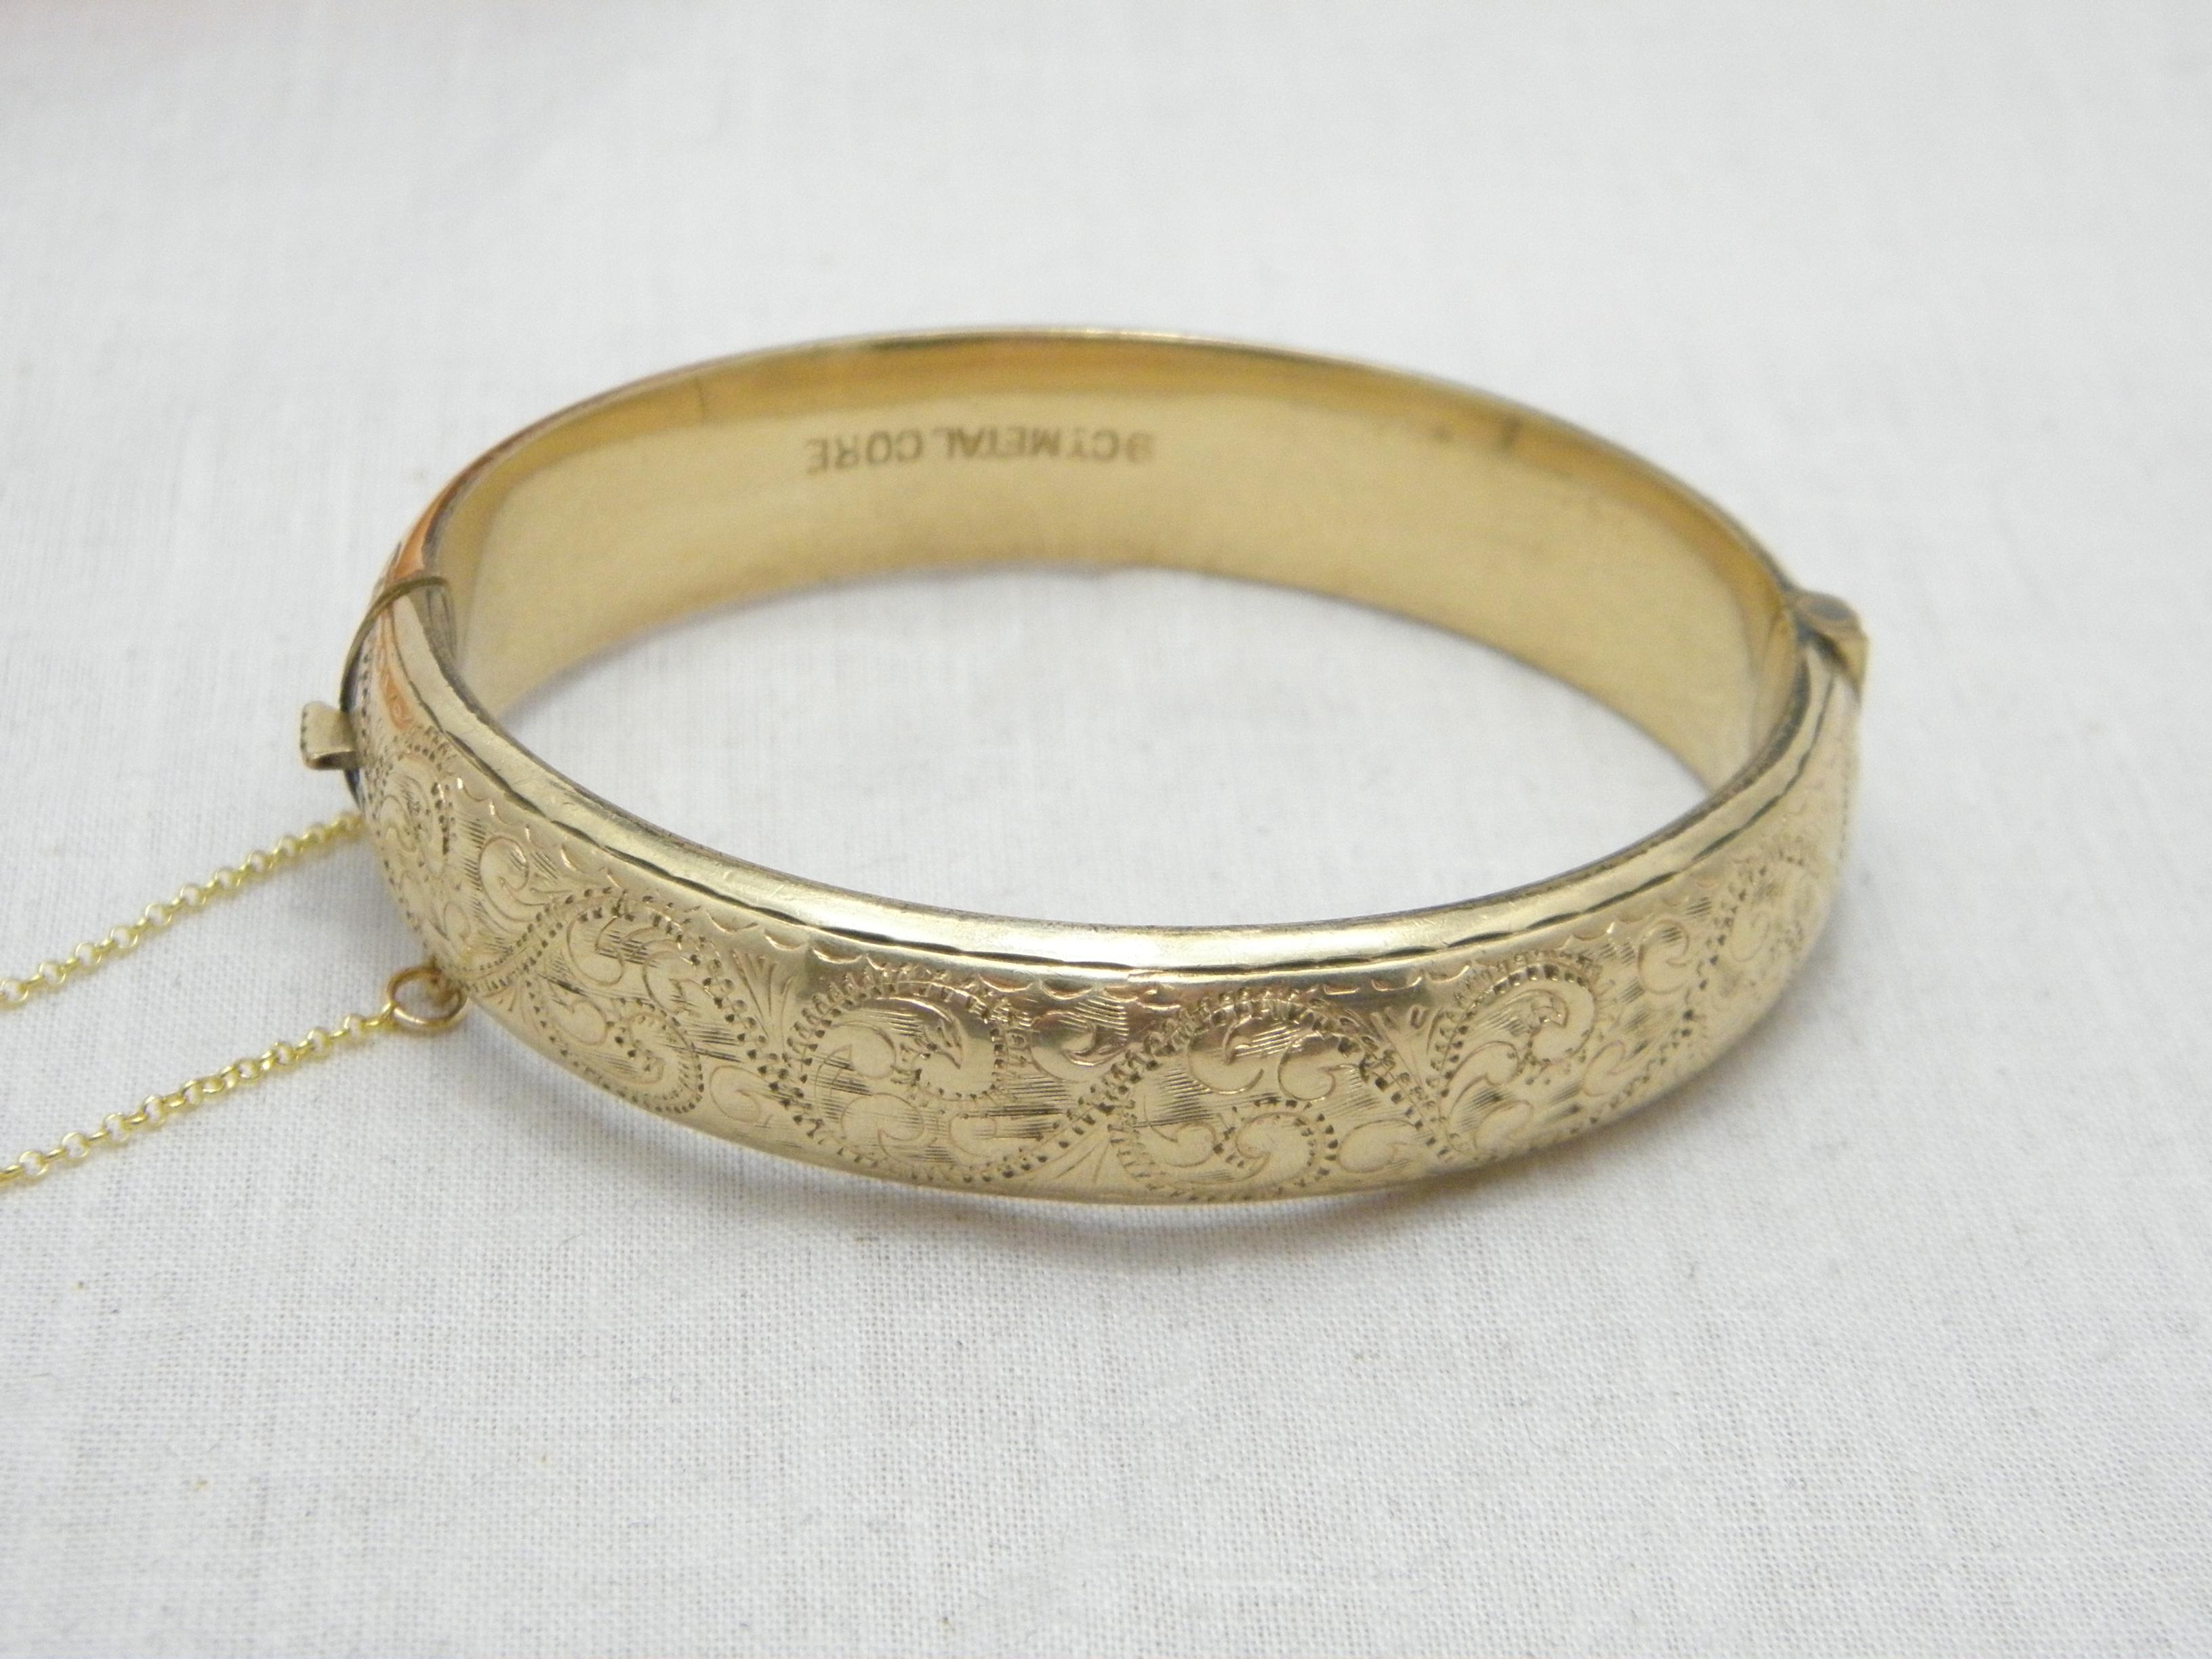 If you have landed on this page then you have an eye for beauty.

On offer is this gorgeous
9CT GOLD CORED FLORAL ENGRAVED HINGED BANGLE BRACELET

DETAILS
Material: Thick 9ct Gold with a Metal Core (see details below)
Style: Hinged Cuff with Hand